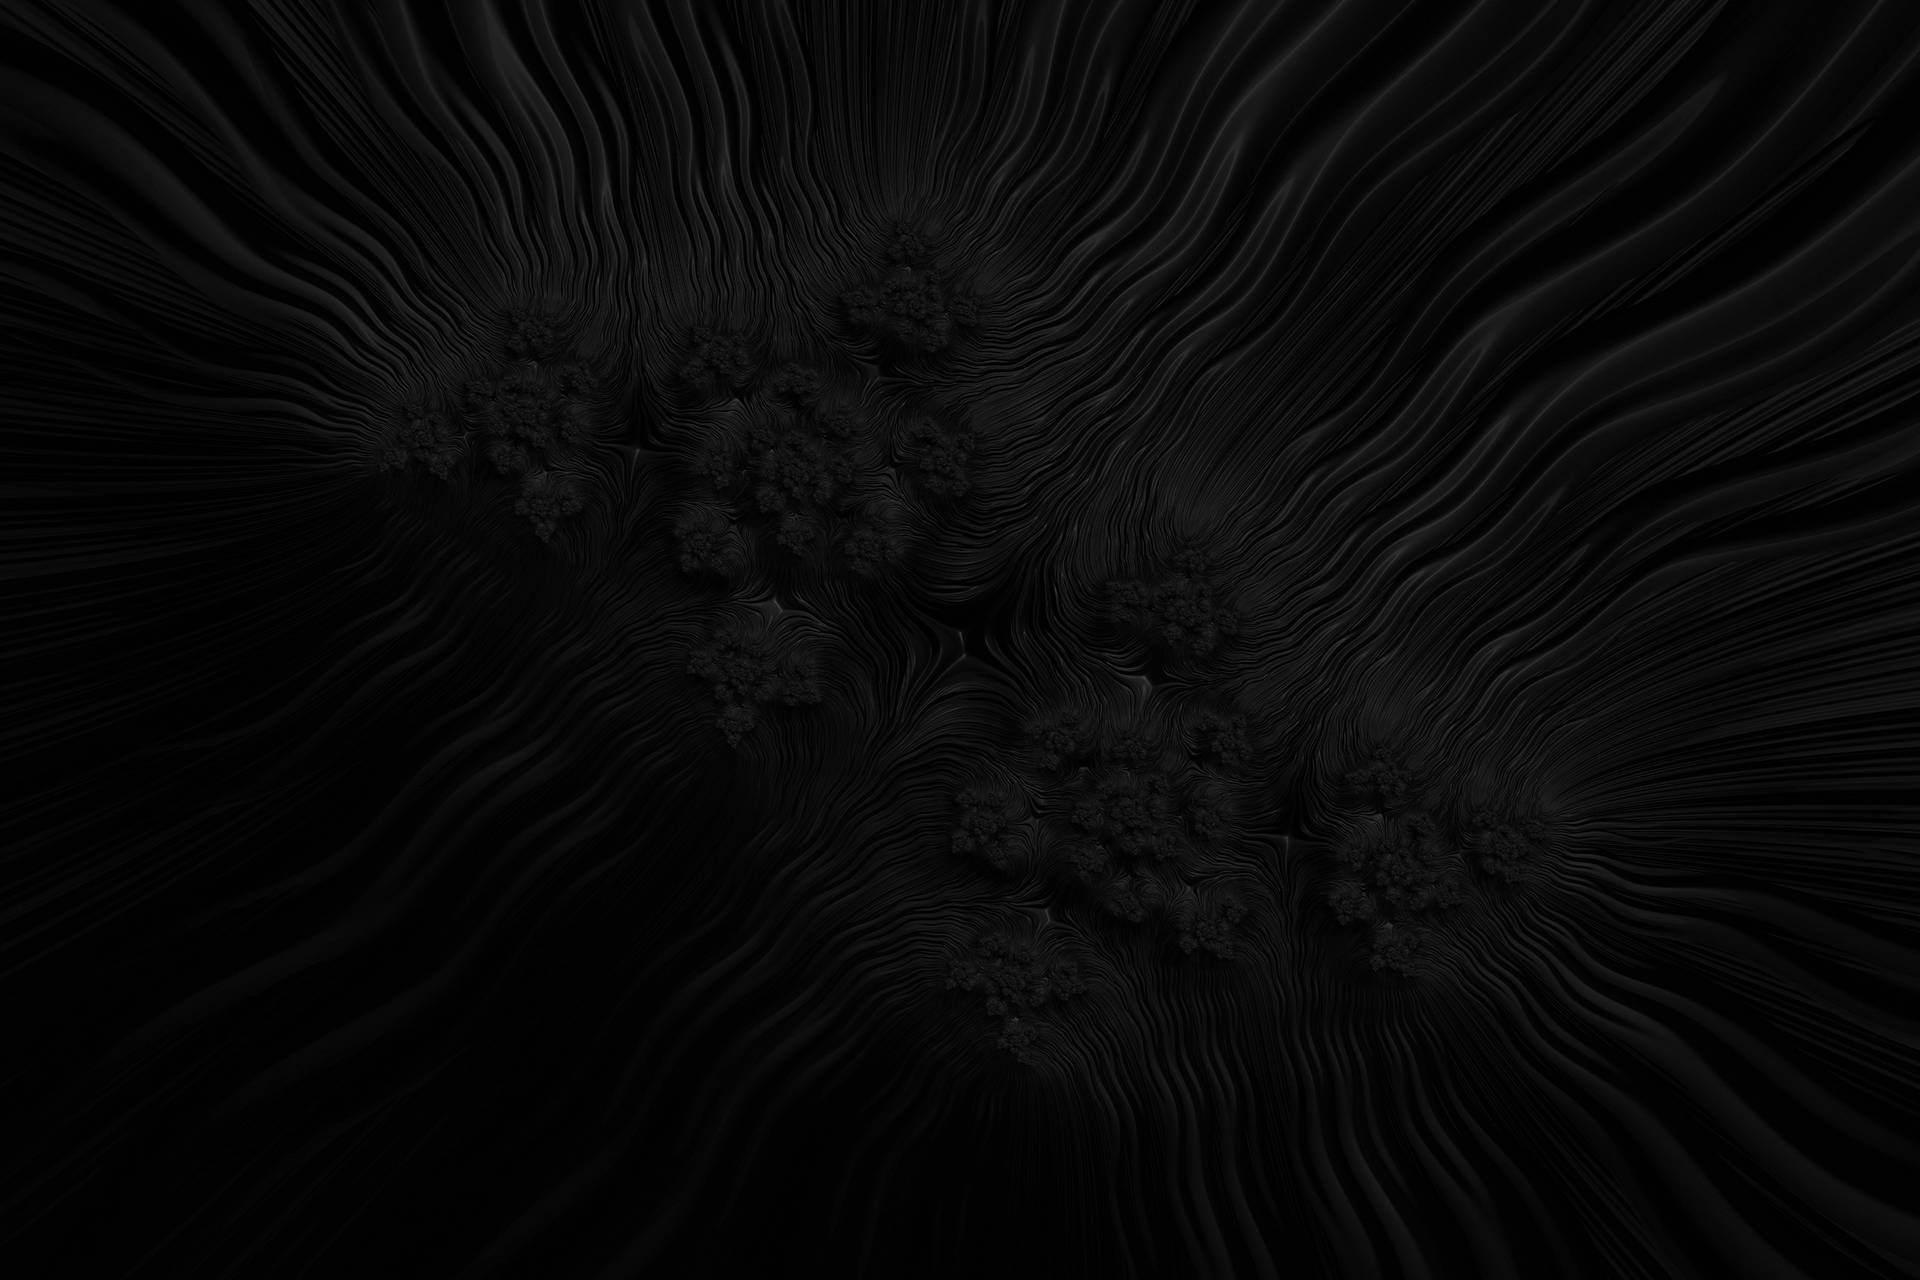 Ominous All-black Textured Abstract Art